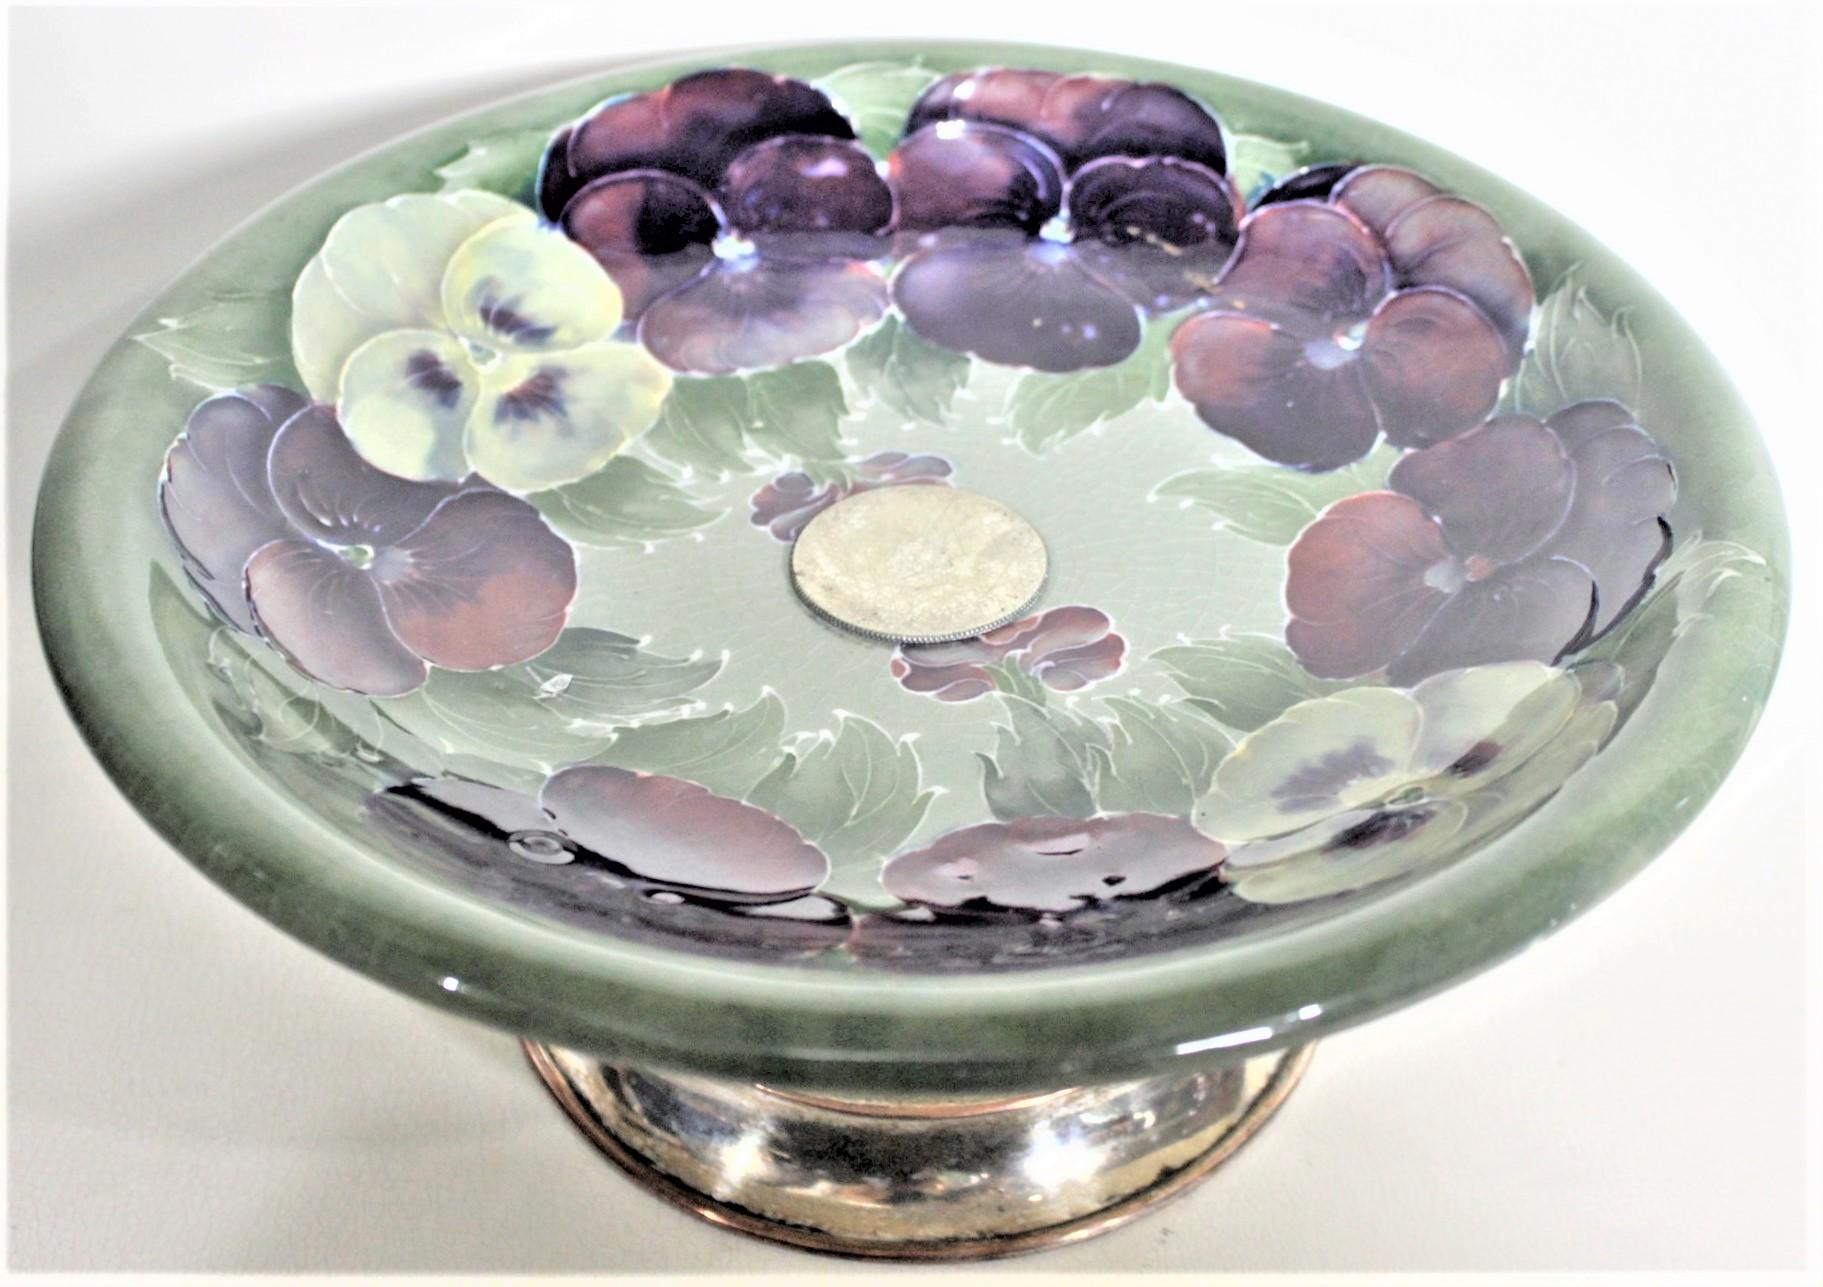 This art pottery pedestal bowl or dish was done by the Moorcroft Pottery Company of England in circa 1925 in their early 'Pansy' pattern. The dish is done with a deep green ground with vibrant purple and cream colored pansies around the inner